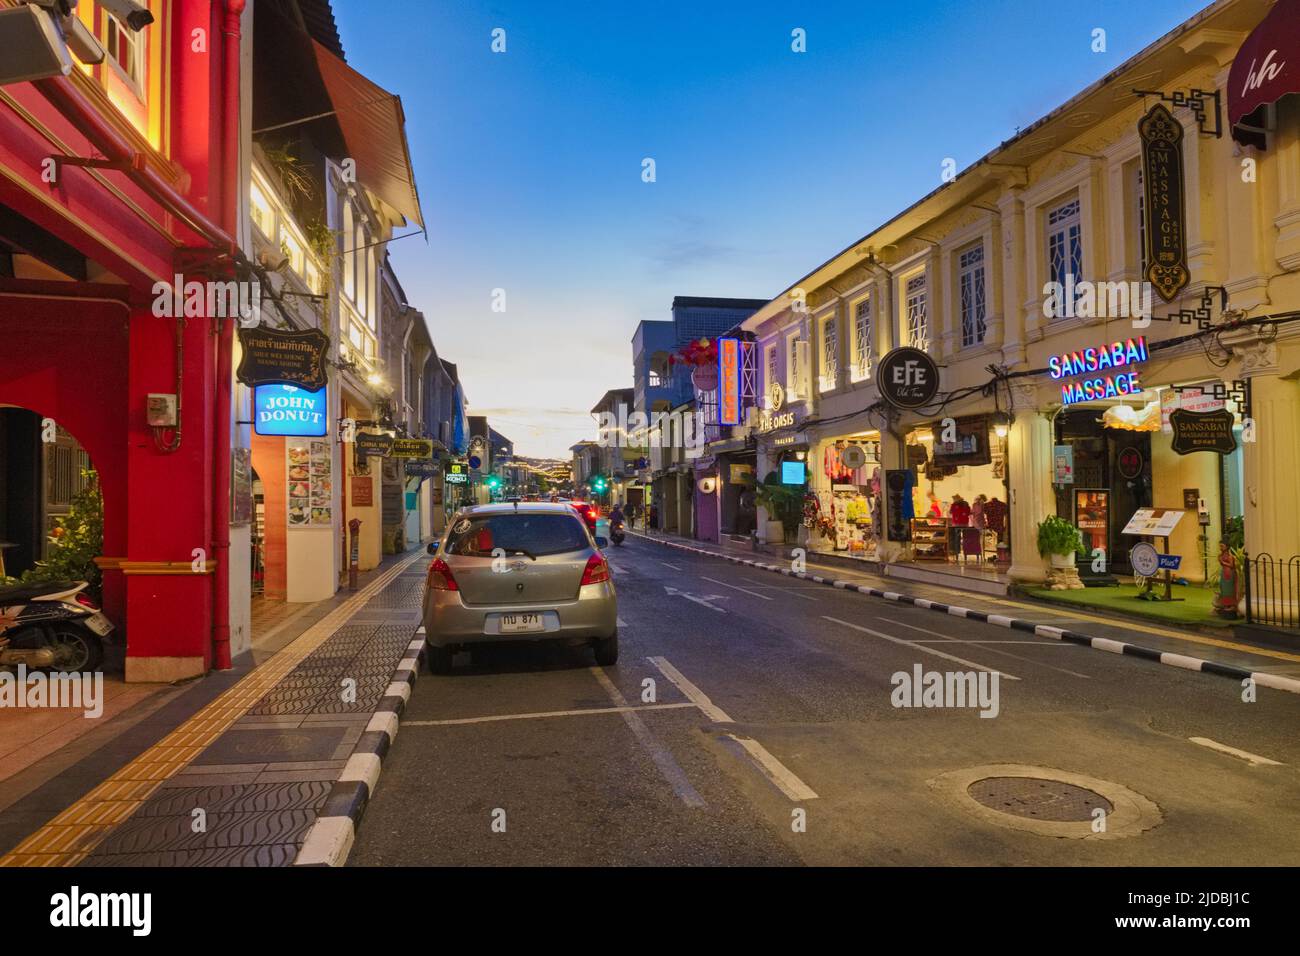 Dusk falls on the picturesque Sino-Portuguese or Peranakan shophouses in Thalang Road in the Old Town heritage area of Phuket Town, Phuket, Thailand Stock Photo